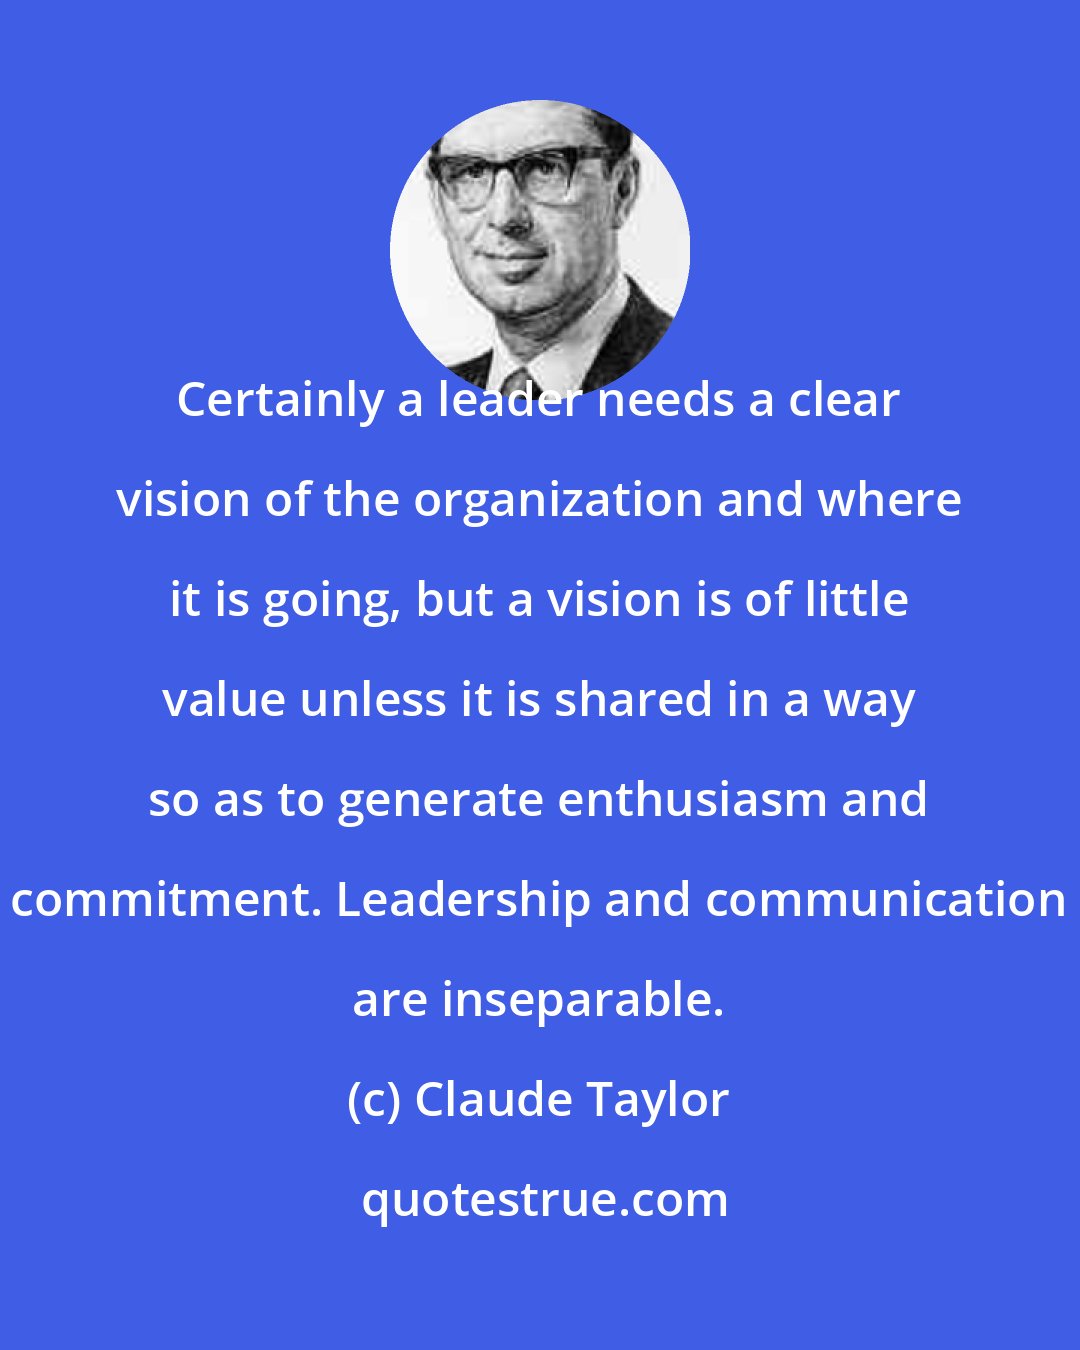 Claude Taylor: Certainly a leader needs a clear vision of the organization and where it is going, but a vision is of little value unless it is shared in a way so as to generate enthusiasm and commitment. Leadership and communication are inseparable.